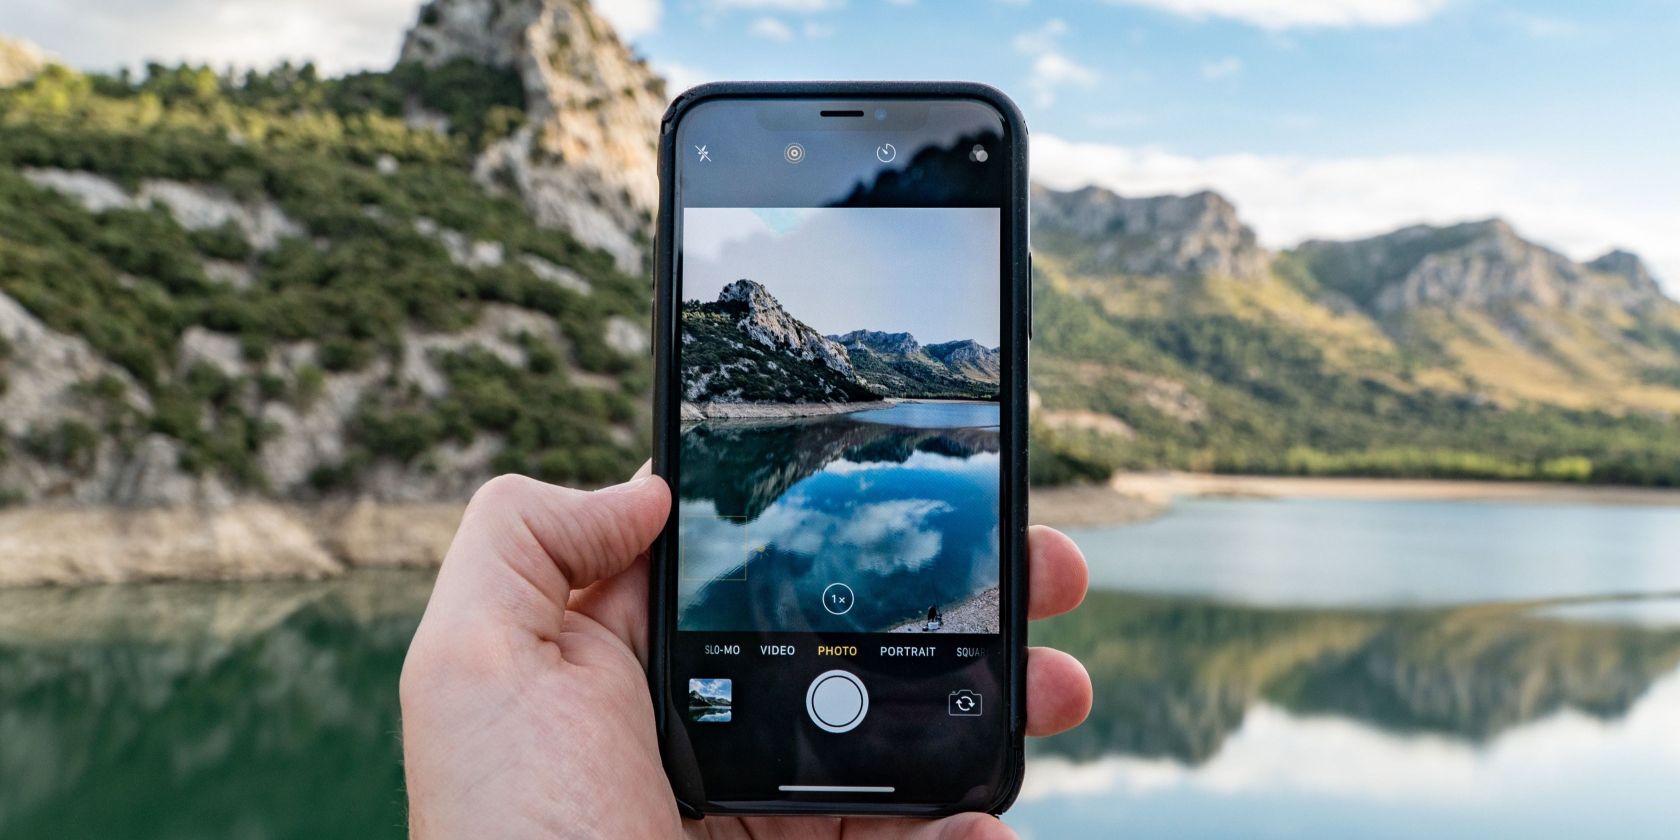 How to Switch From HEIC to JPEG Photos on an iPhone or iPad